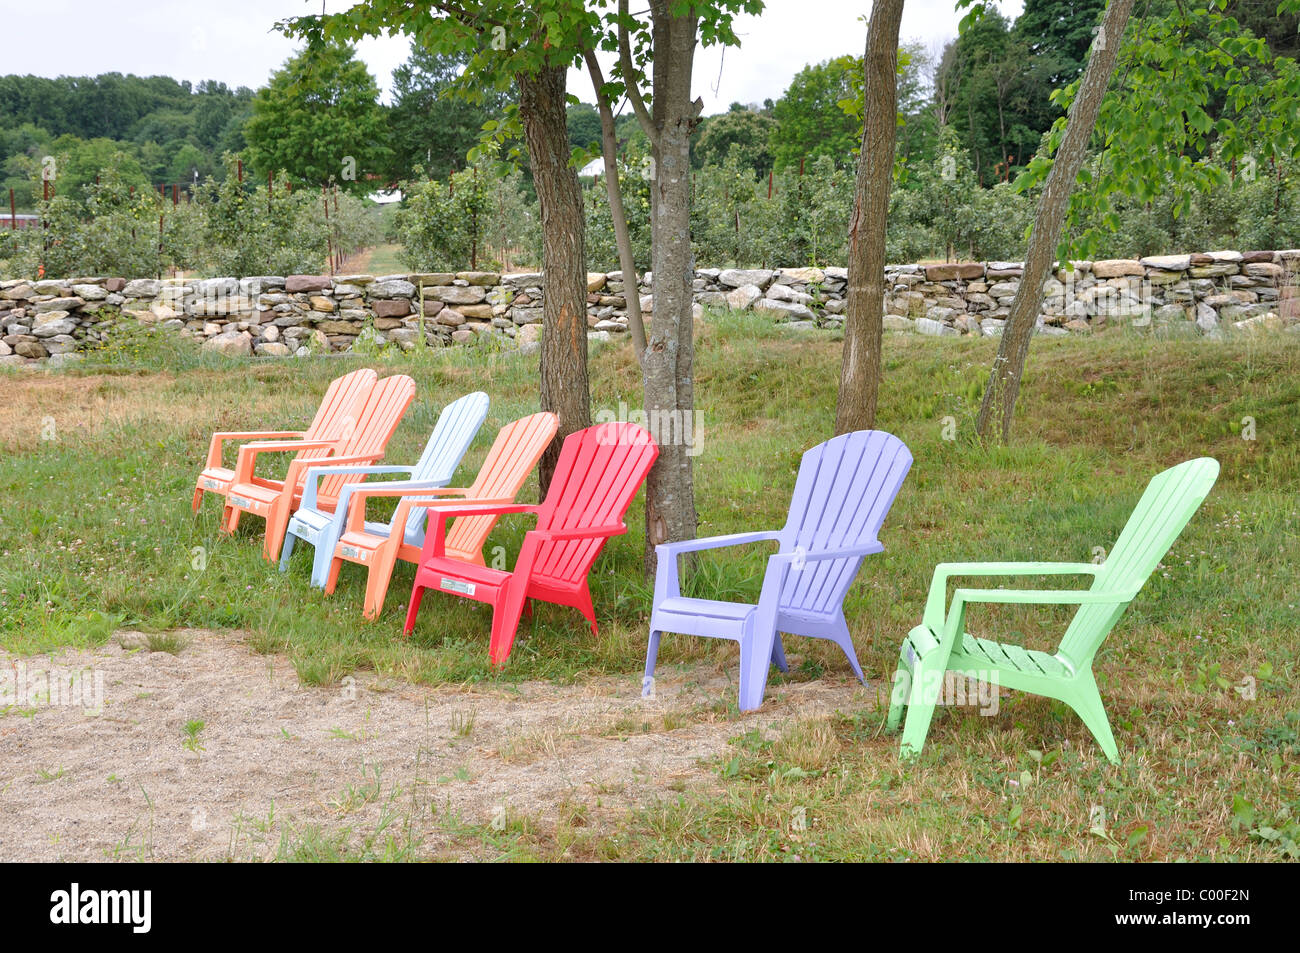 Colorful Chairs On Farm In Wethersfield Connecticut New England